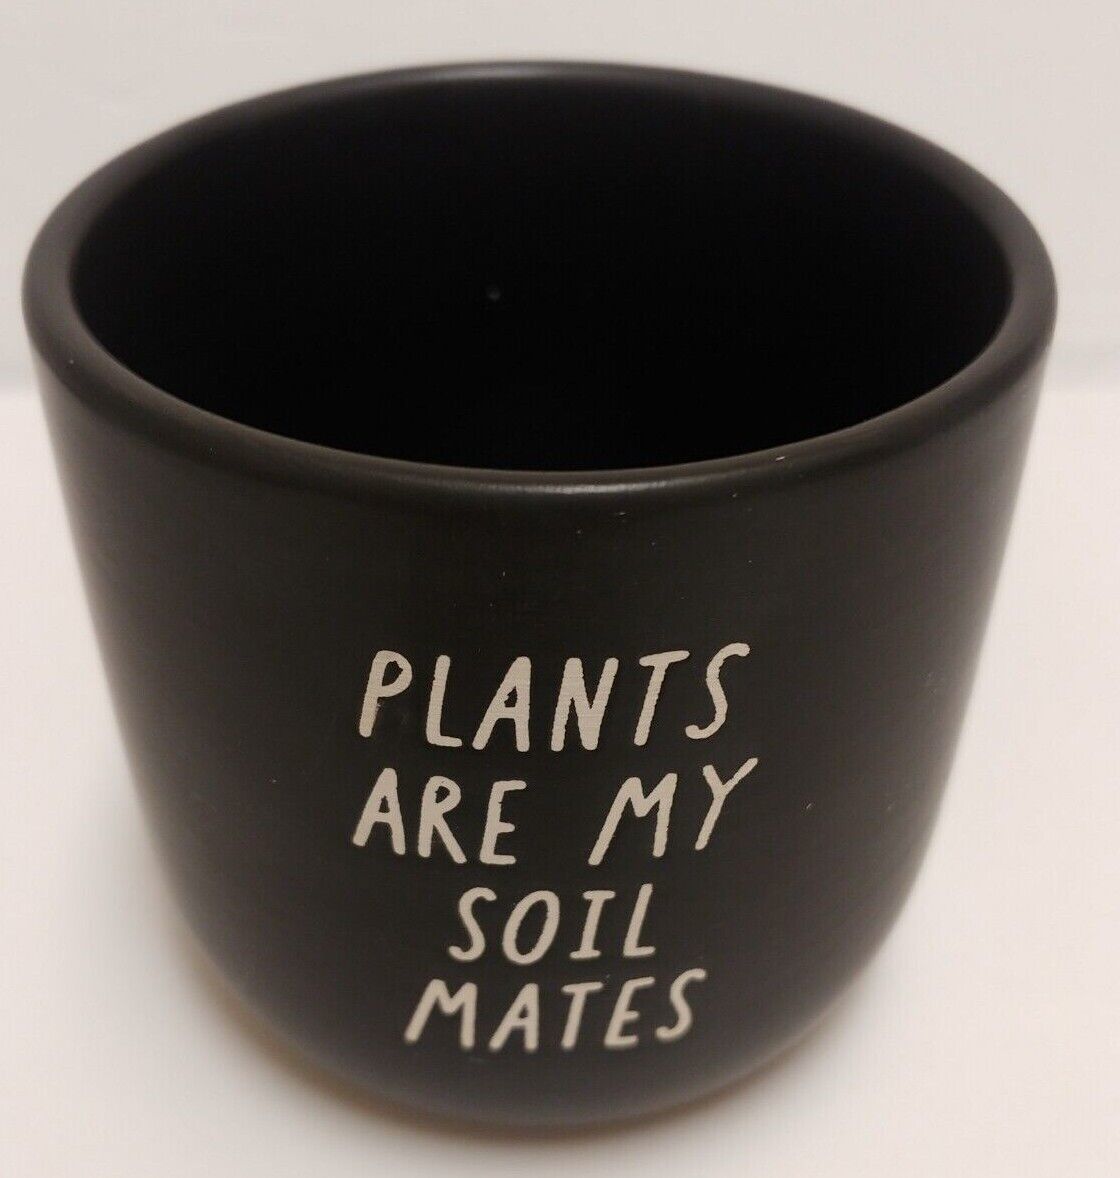 Primary image for Succulent Plant Pot Black Ceramic Plants Are My Soil Mates 3.25" High